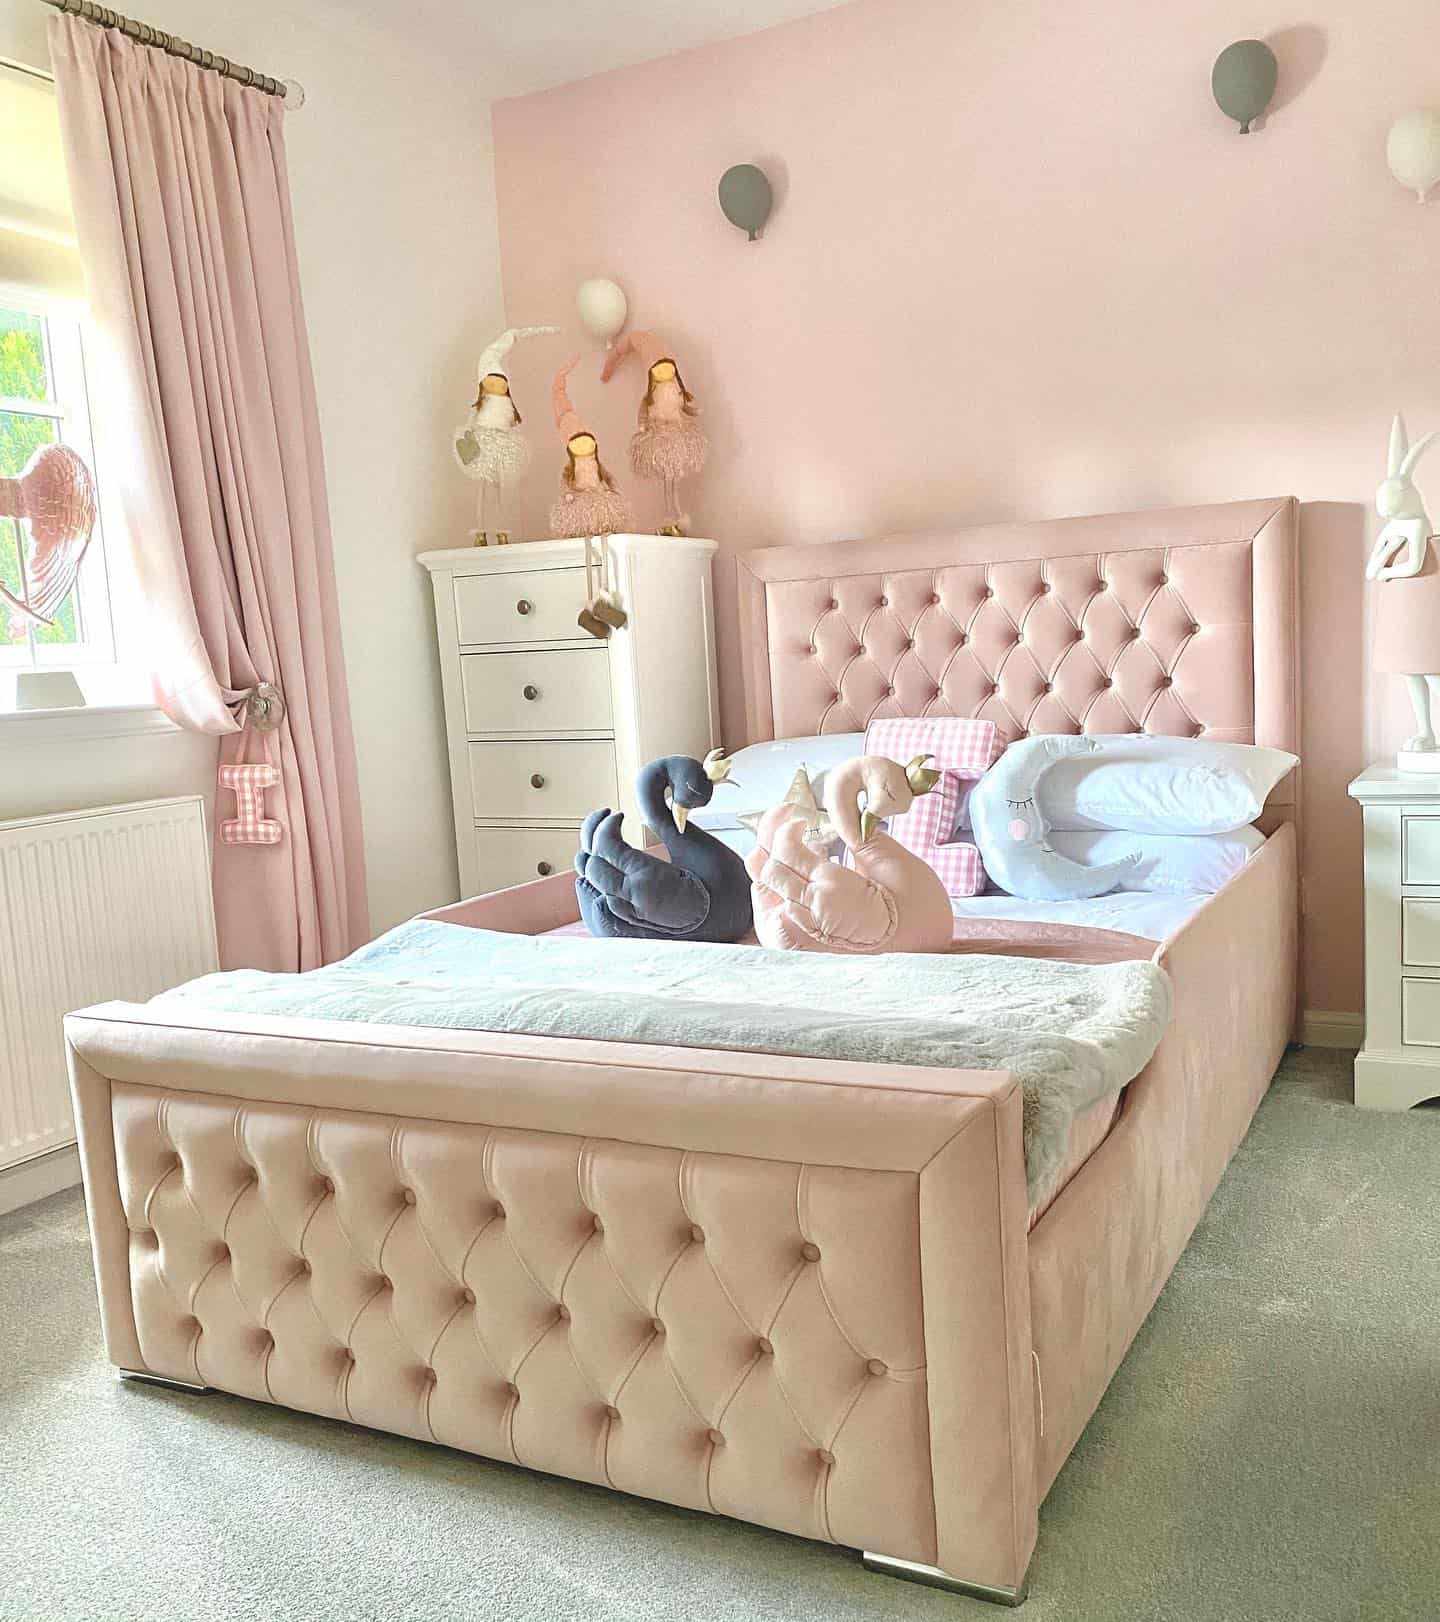 The Most Beautiful Bedroom Ideas For Girls – Girlie Designs